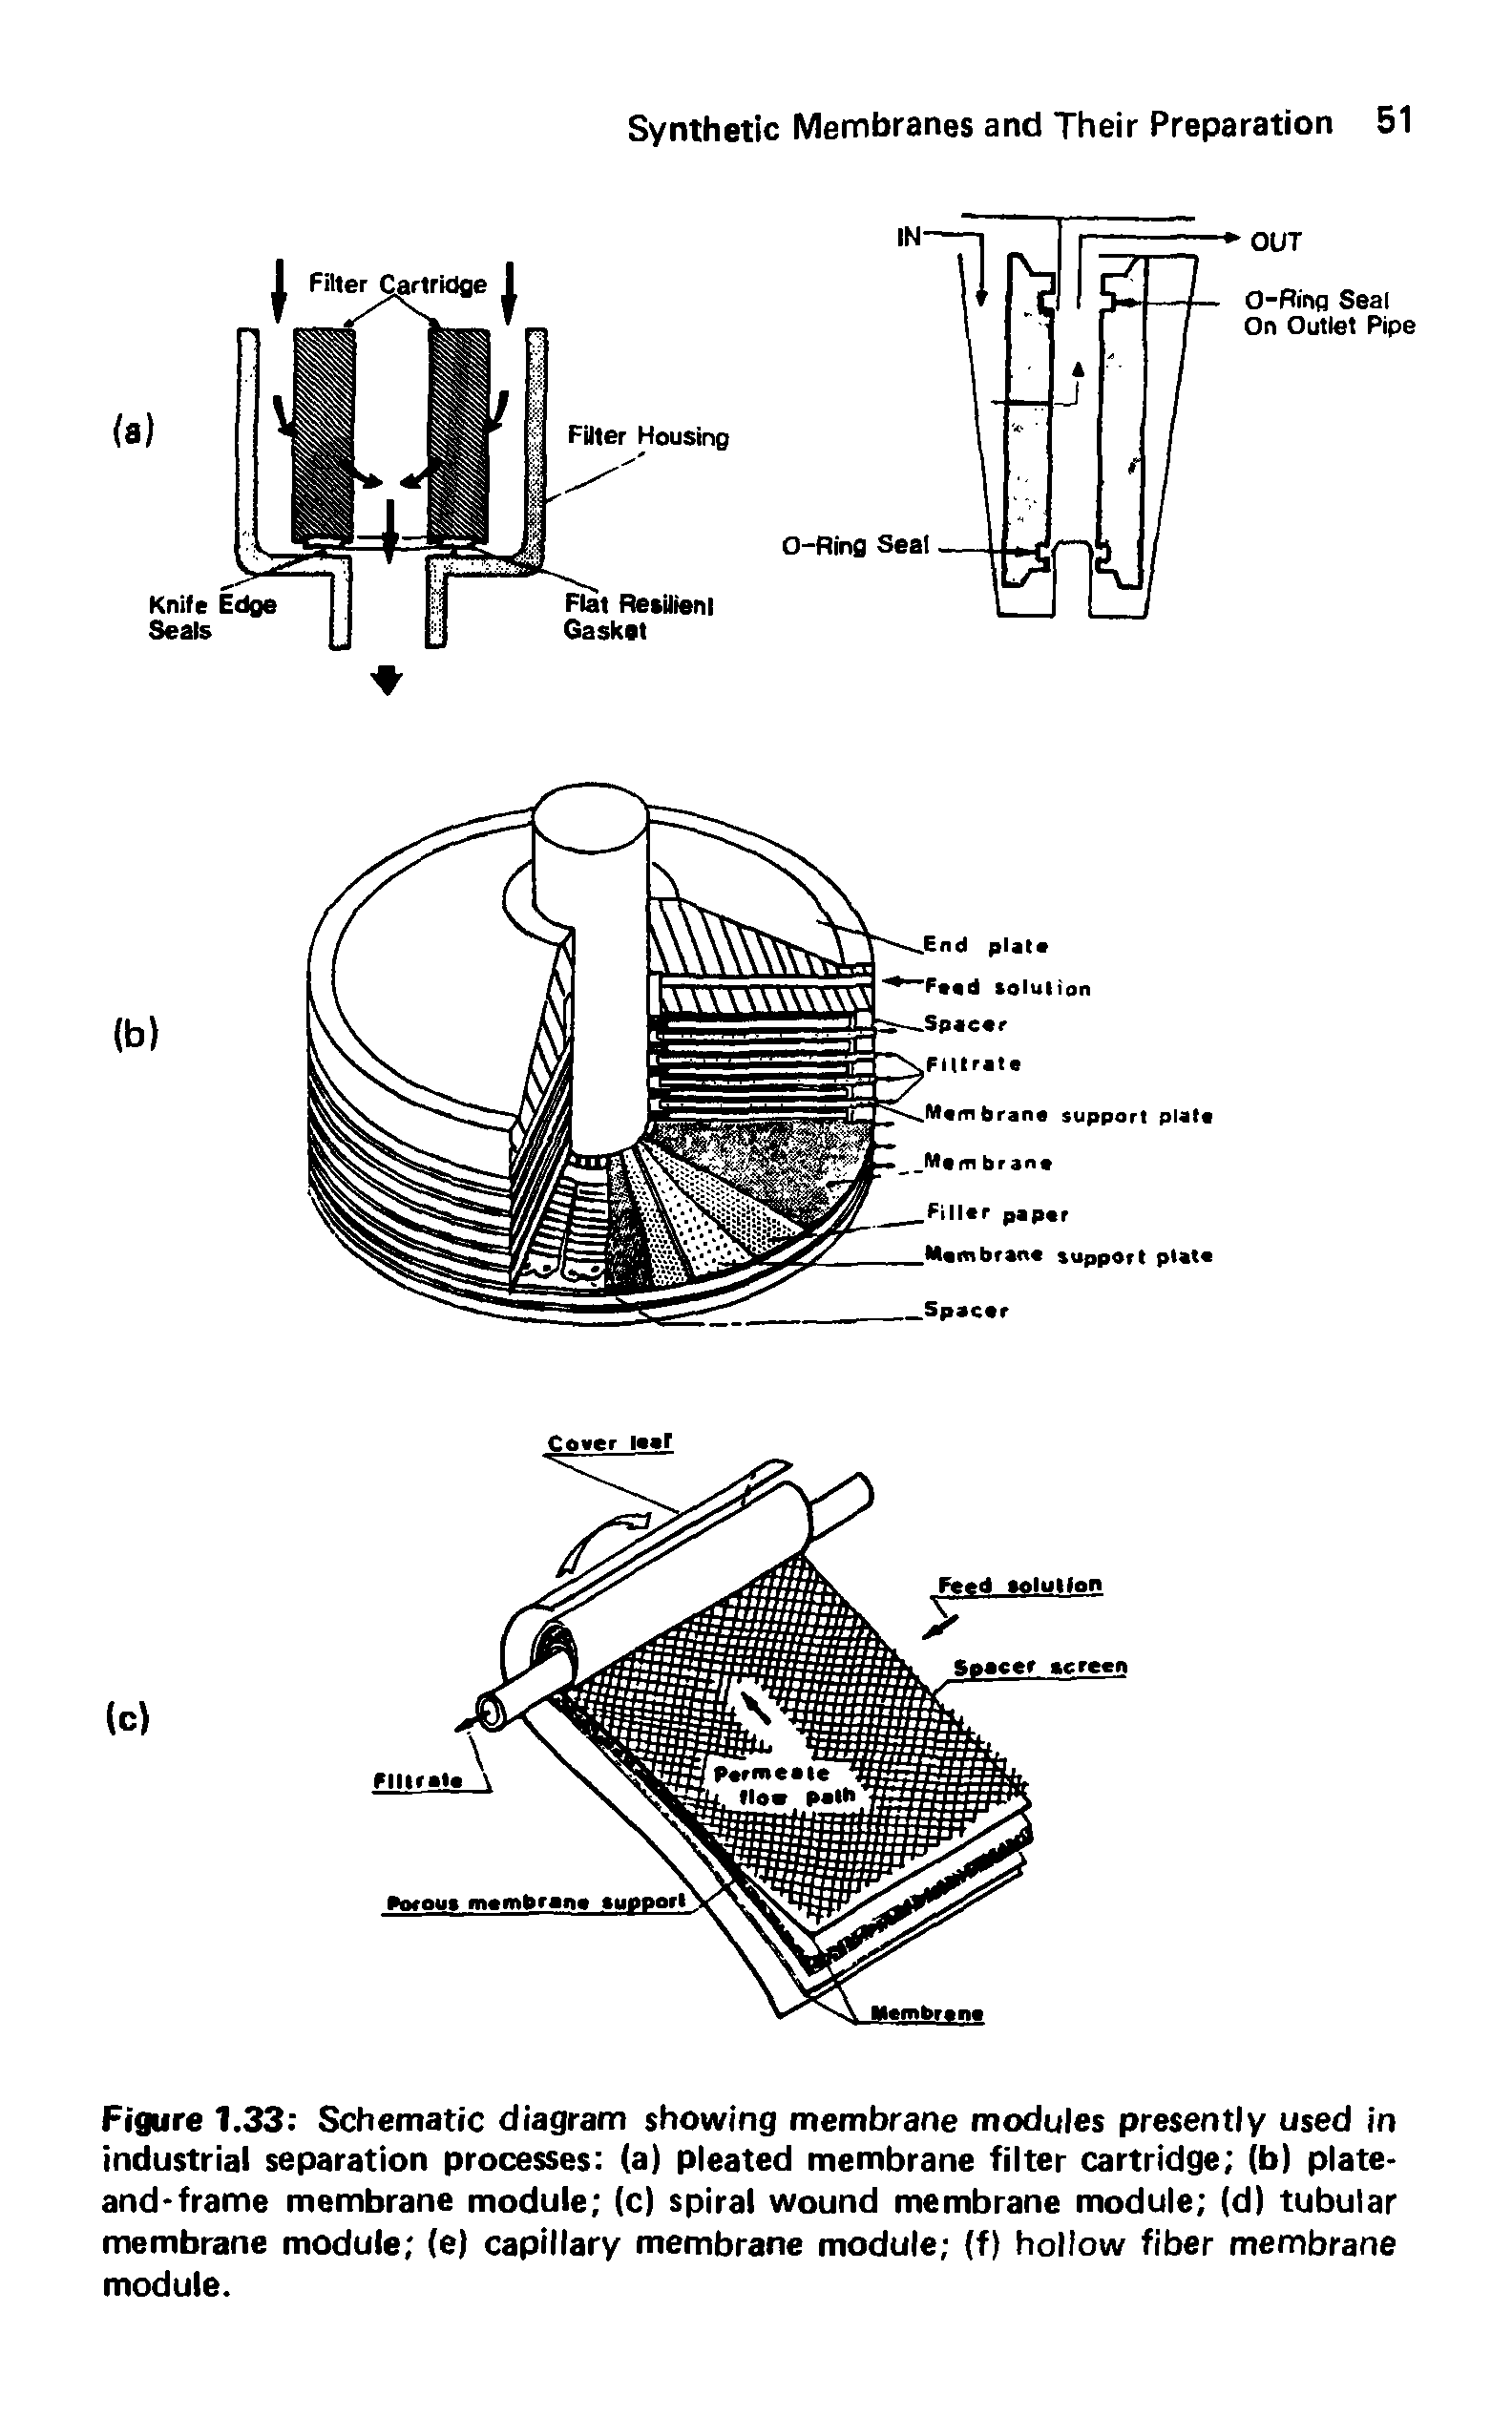 Figure 1.33 Schematic diagram showing membrane modules presently used in industrial separation processes (a) pleated membrane filter cartridge (b) plate-and-frame membrane module (c) spiral wound membrane module (d) tubular membrane module (e) capillary membrane module (f) hollow fiber membrane module.